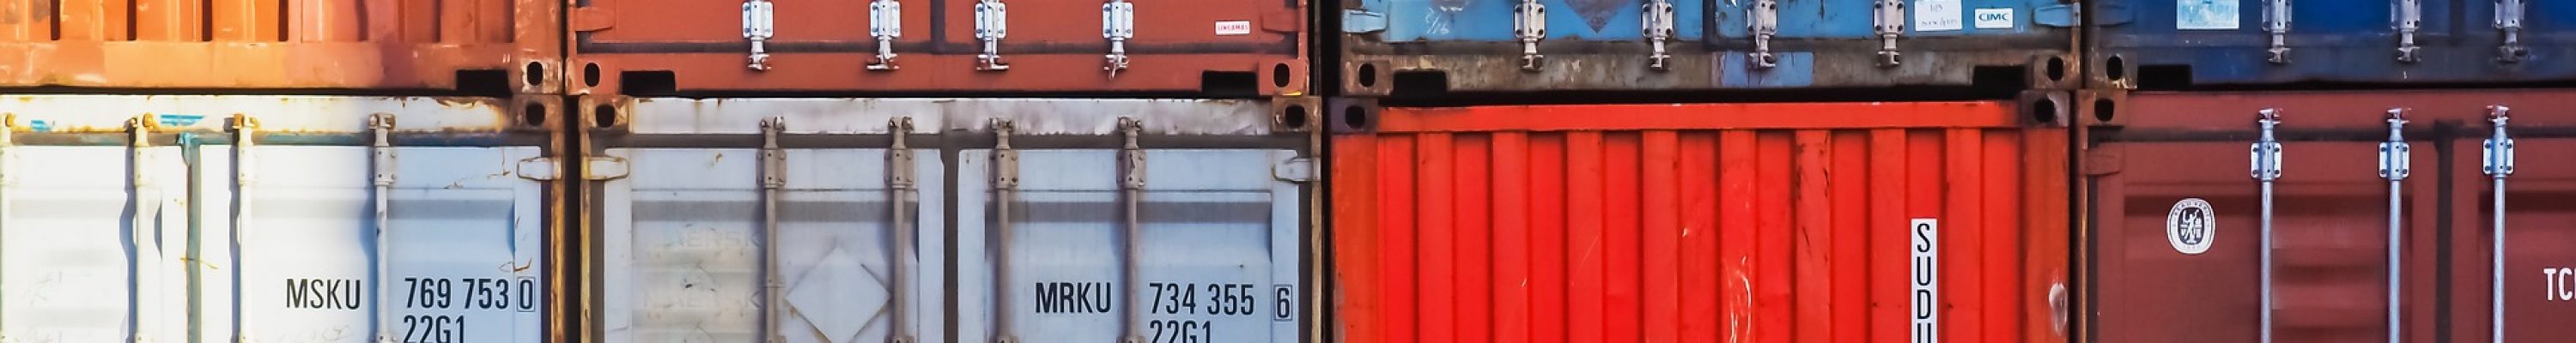 container-3859710_1920